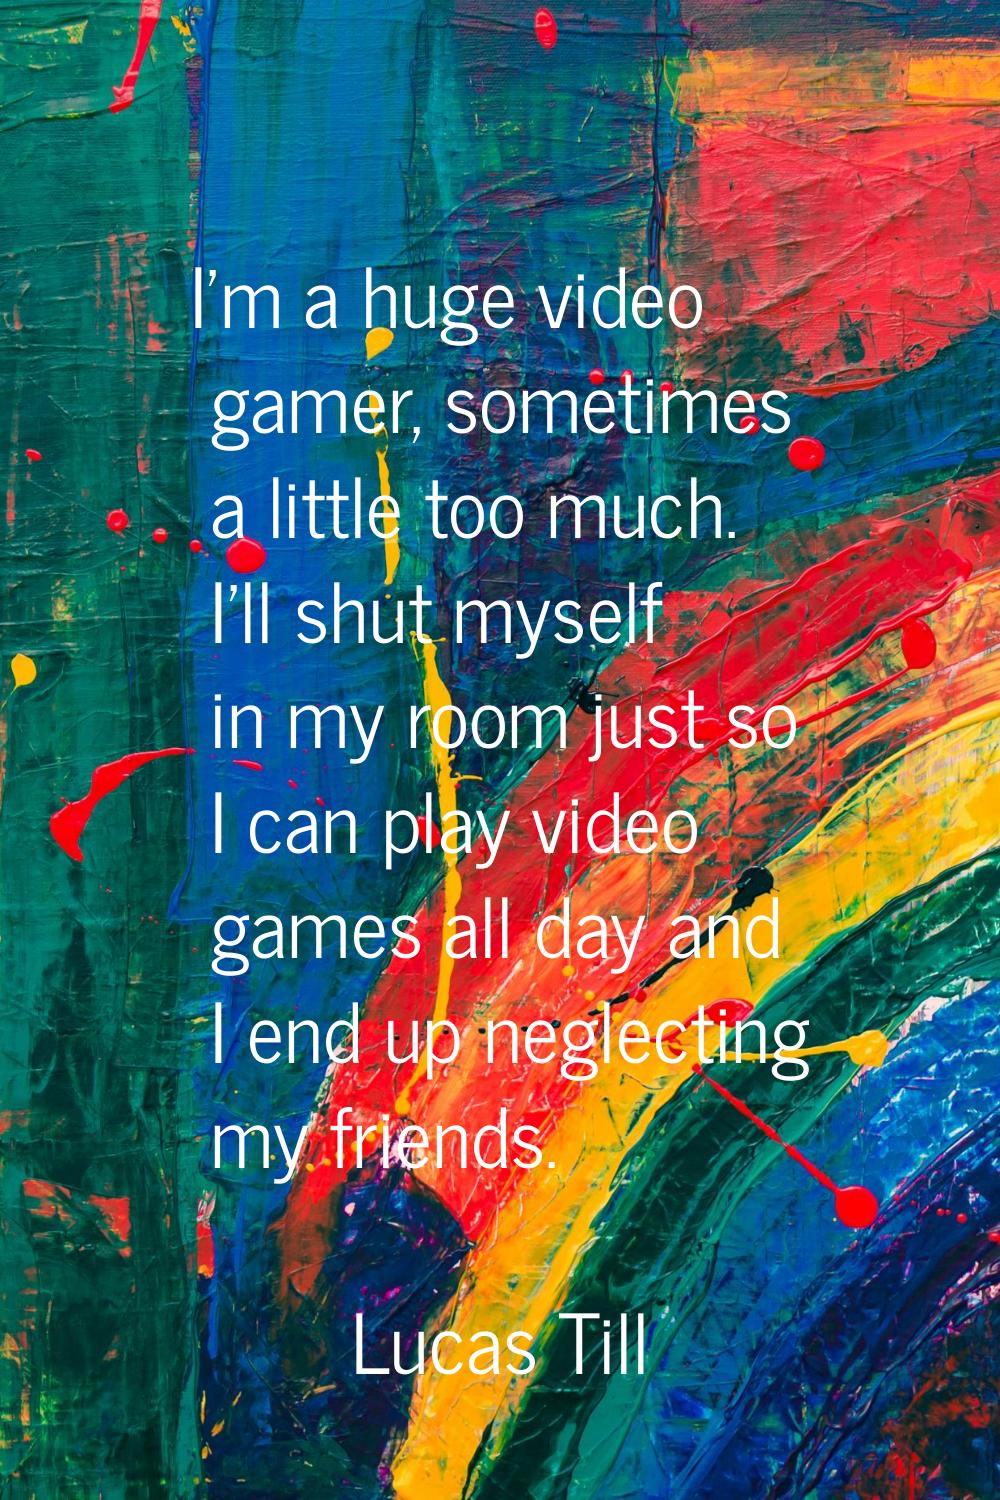 I'm a huge video gamer, sometimes a little too much. I'll shut myself in my room just so I can play